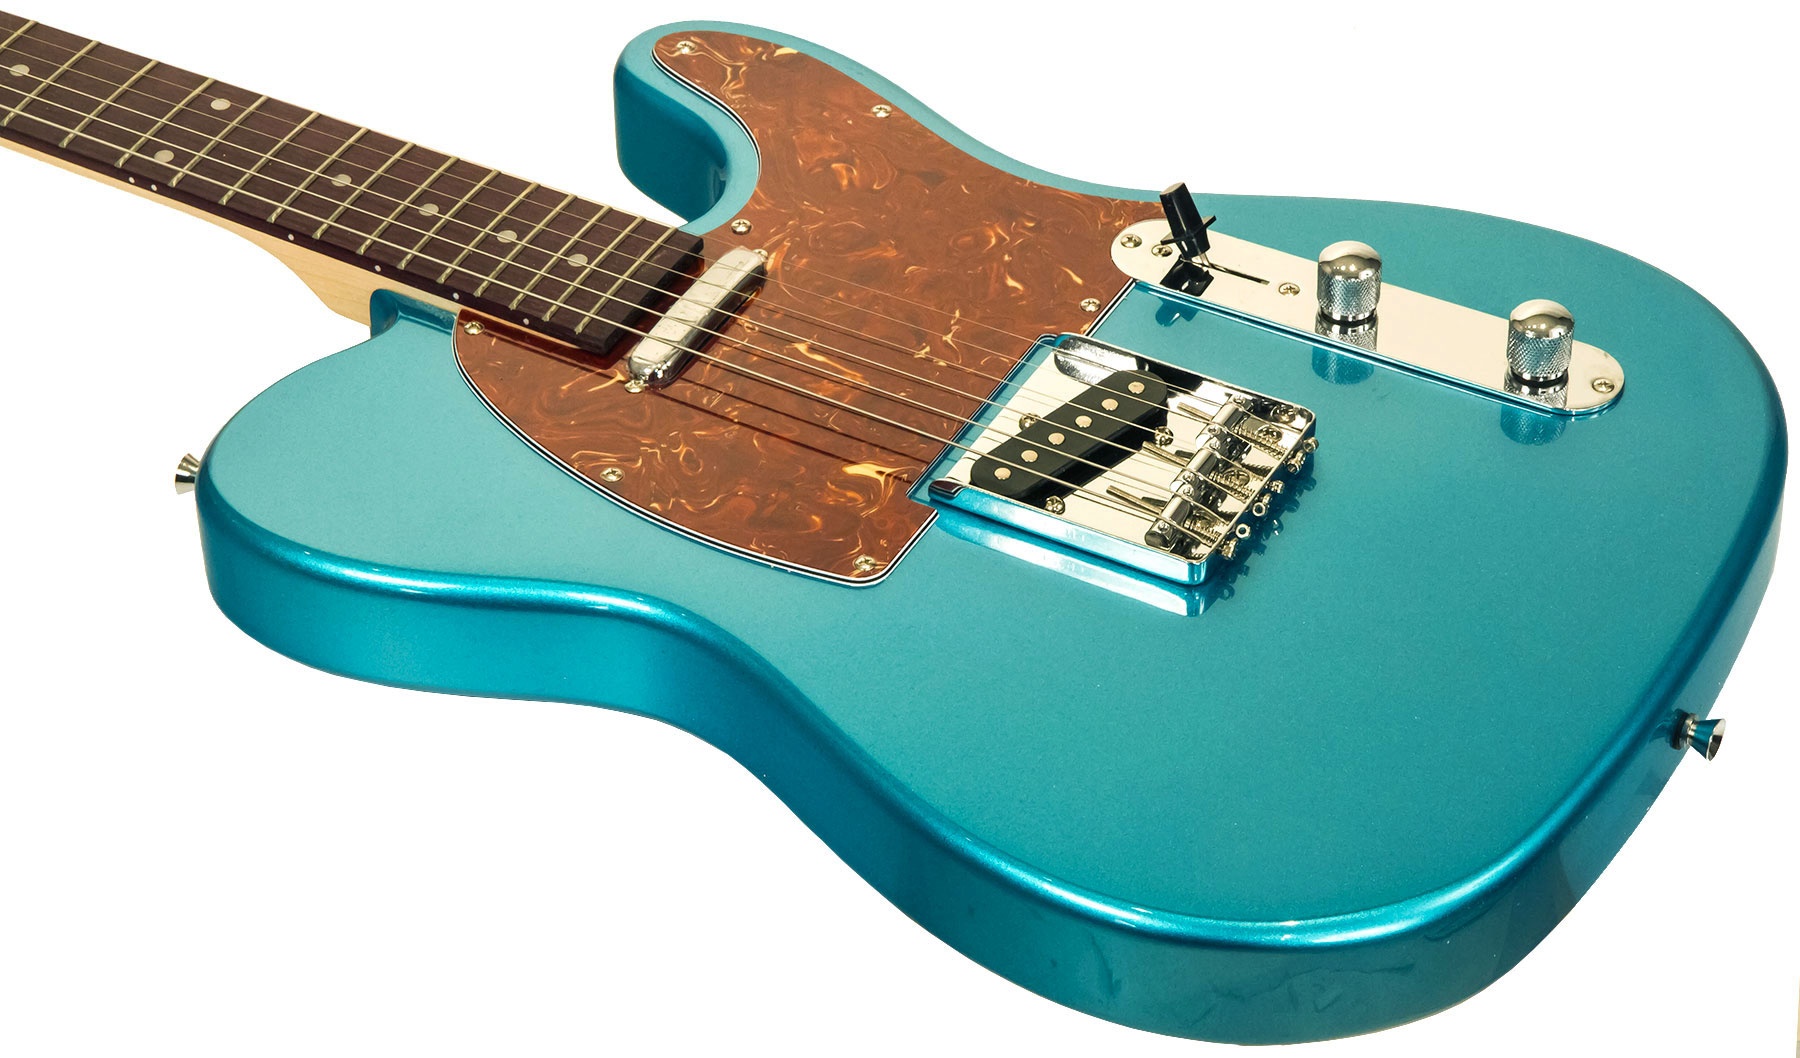 Eastone Tl70 +marshall Mg10 +housse +courroie +cable +mediators - Metallic Light Blue - Electric guitar set - Variation 2